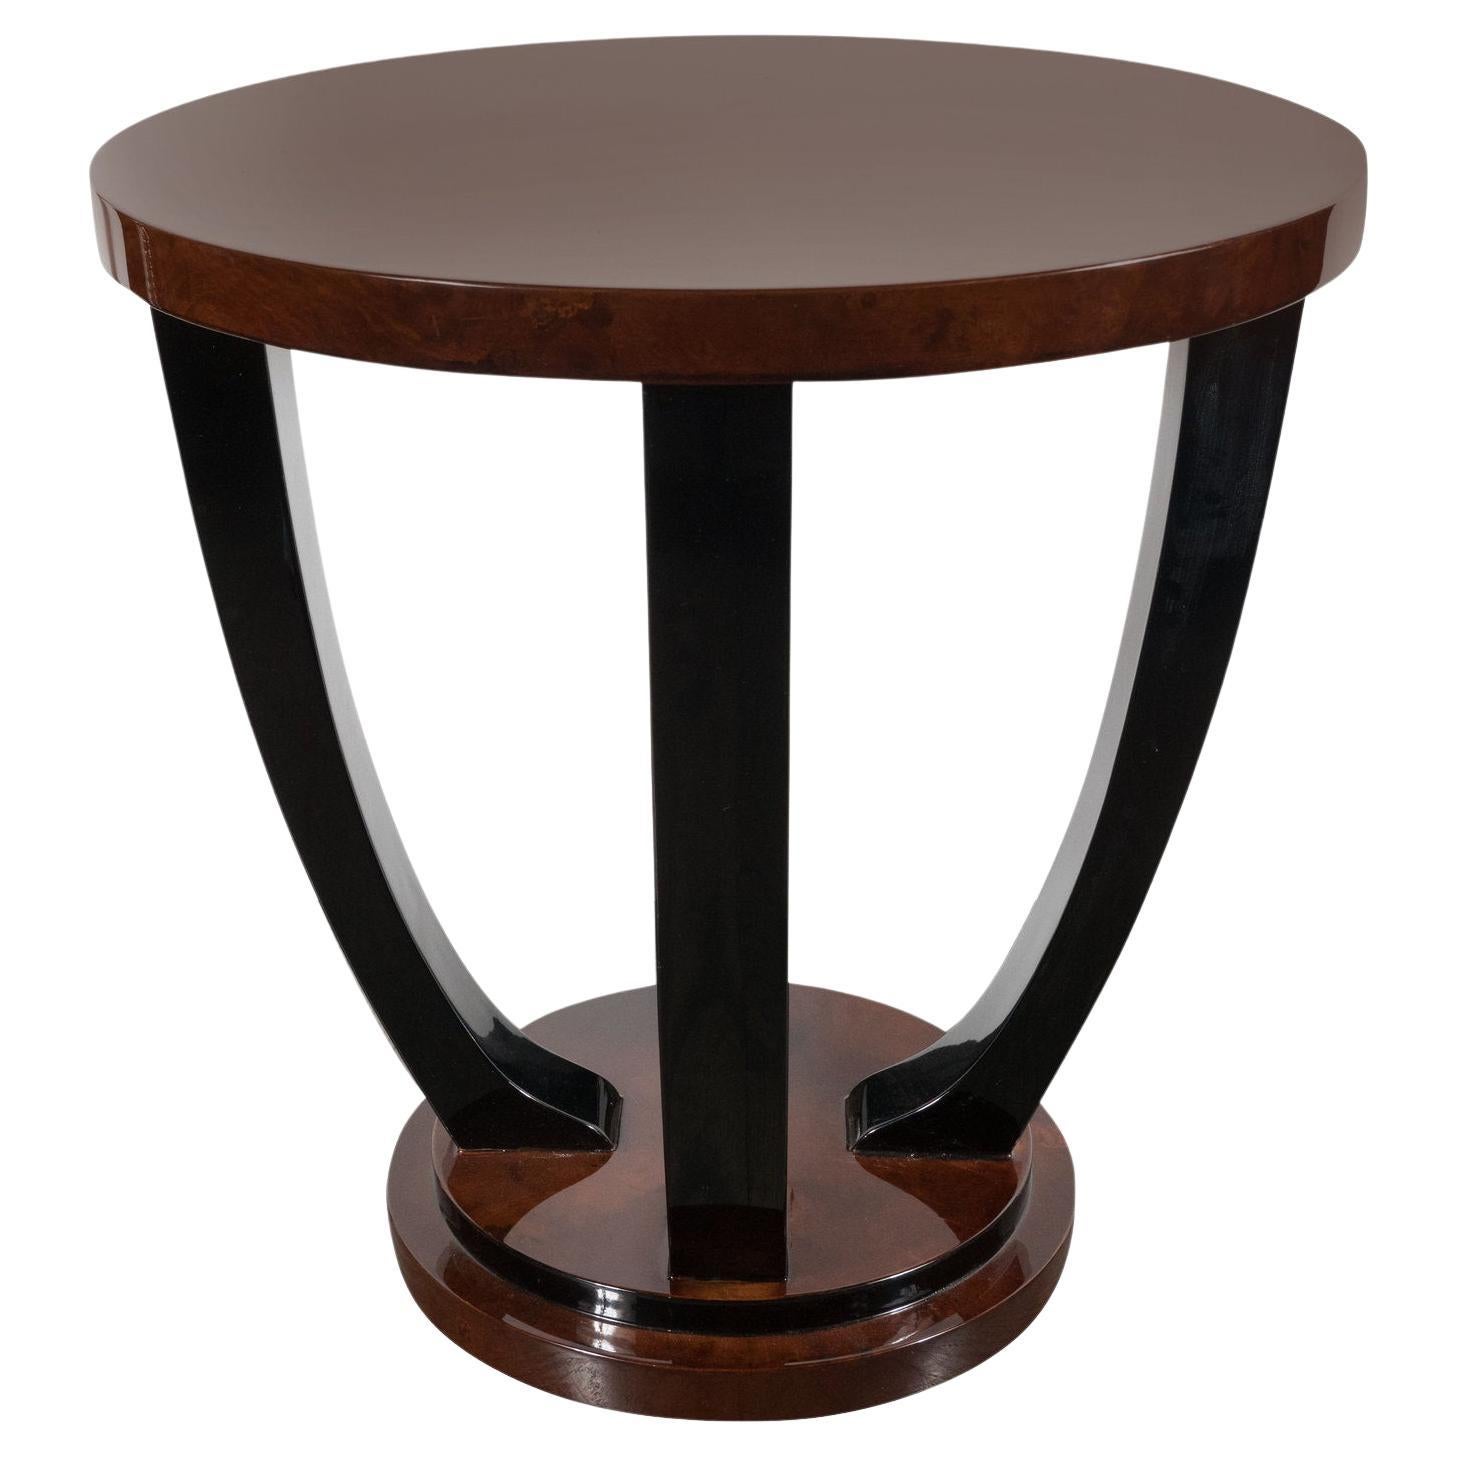 French Art Deco Two-Tiered Bookmatched Walnut and Black Lacquer Gueridon Table